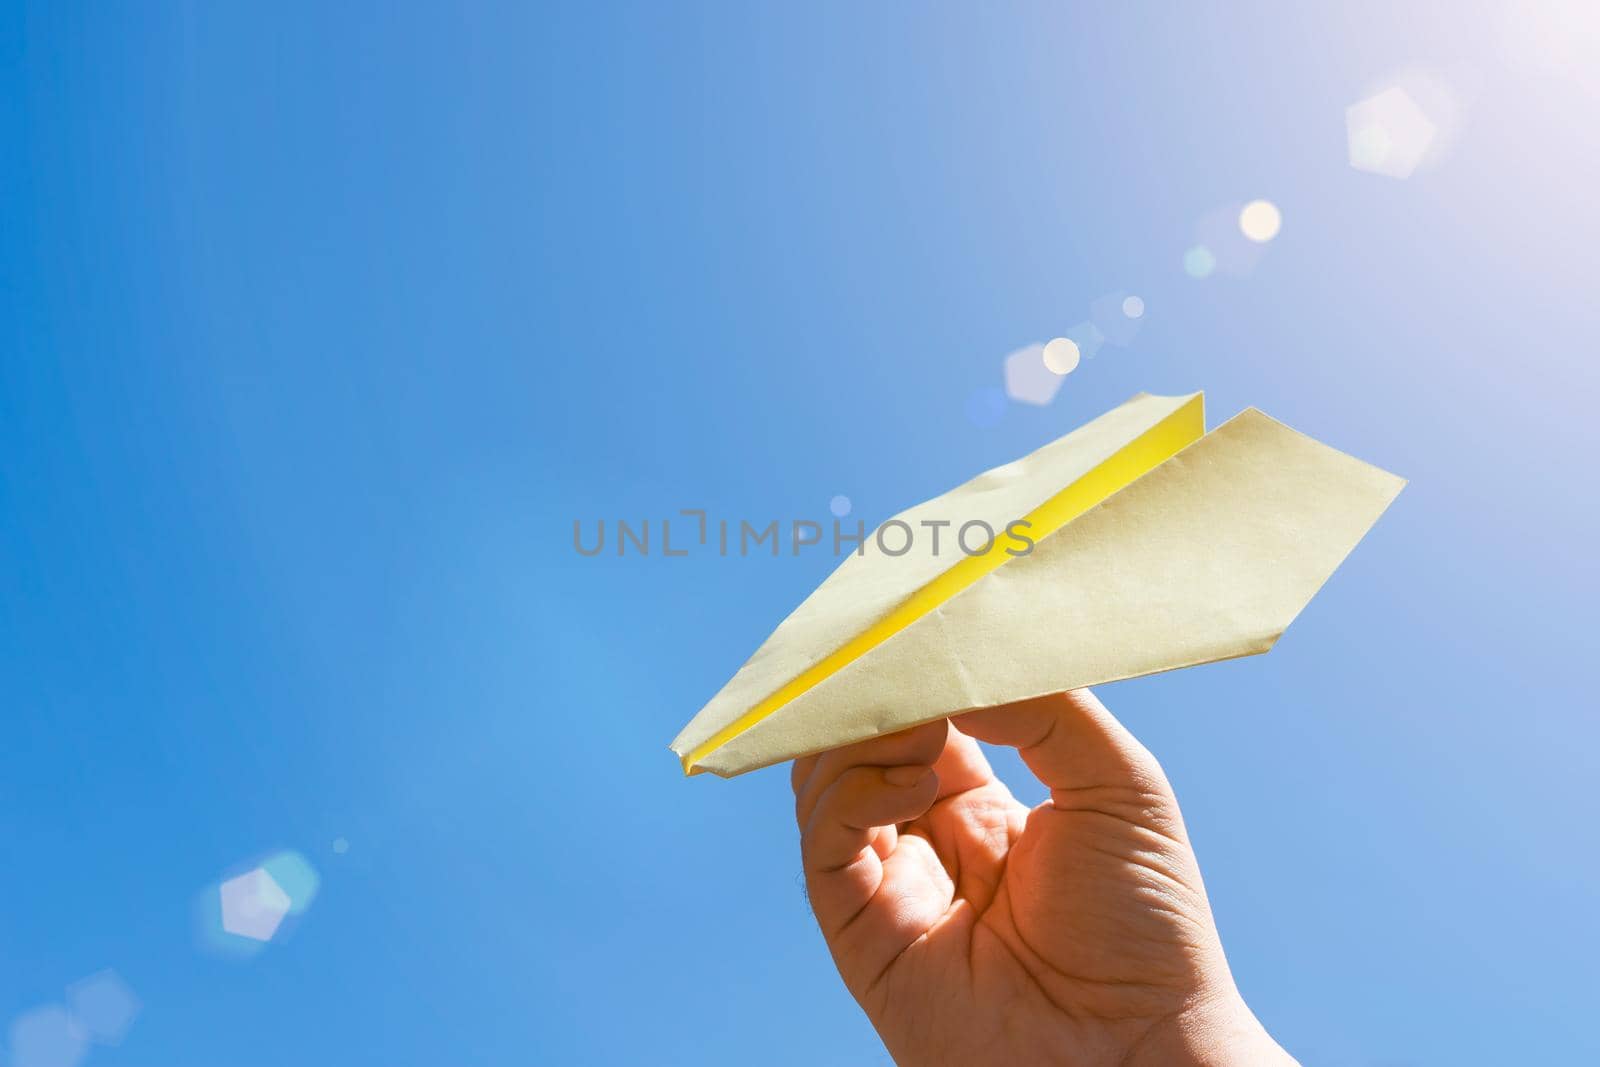 Children play with a paper airplane against a background of blue sky and warm summer sun glare. Hobby to fold origami paper